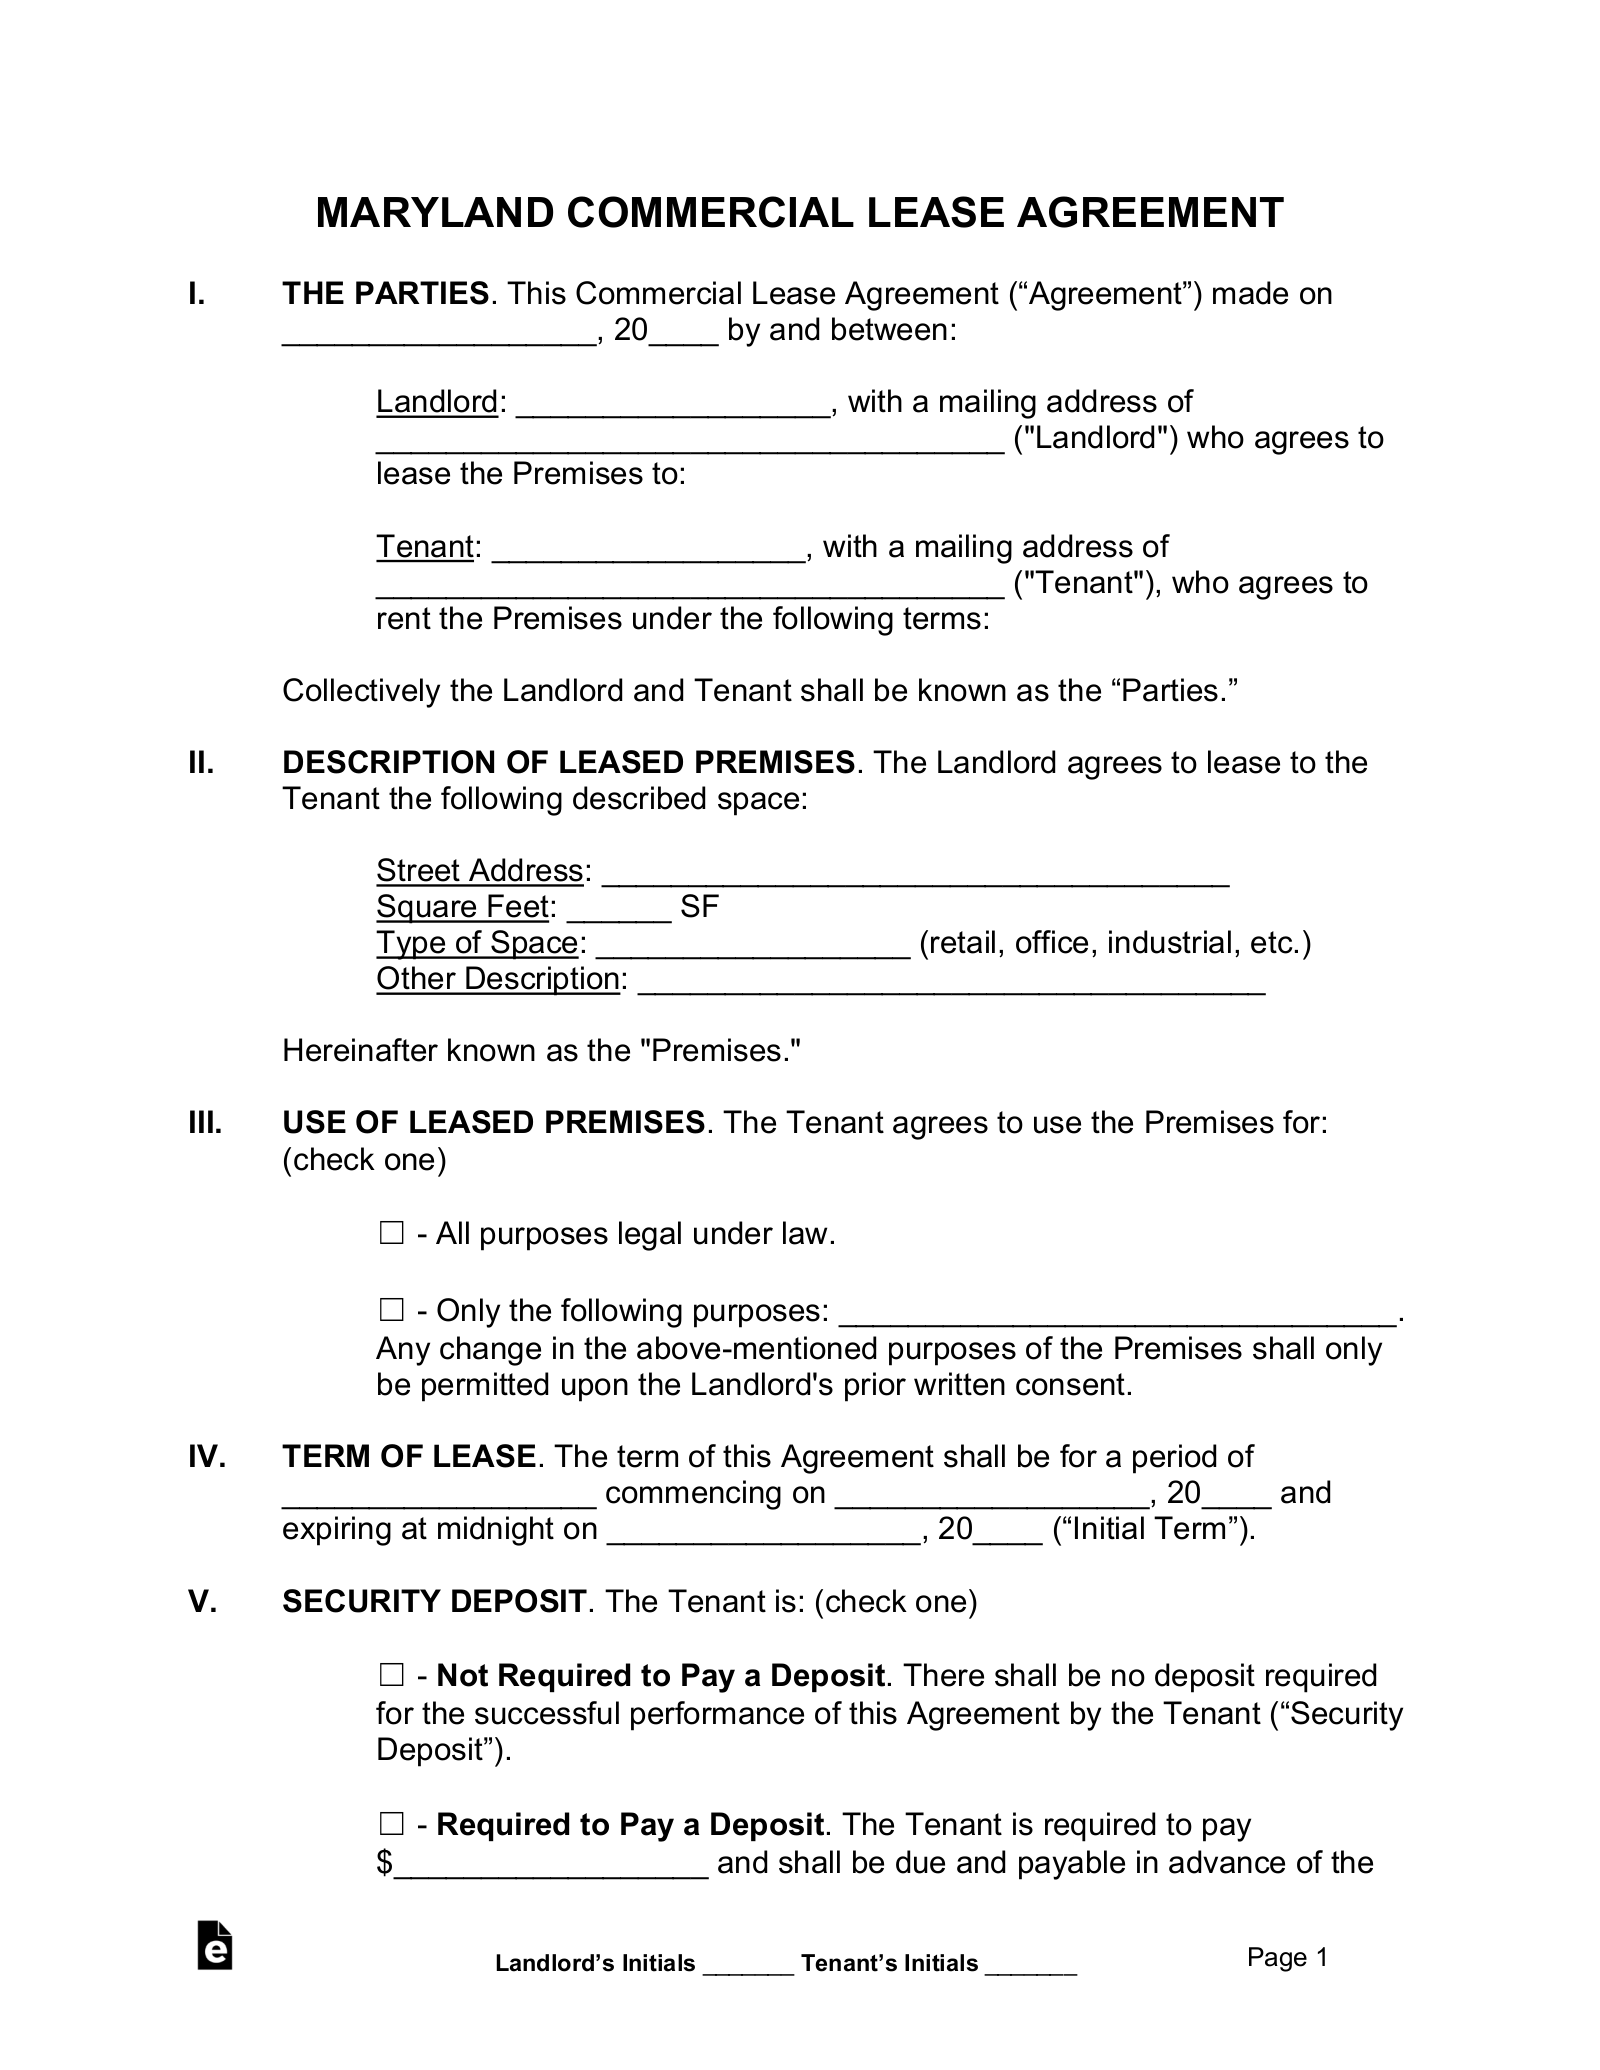 Maryland Commercial Lease Agreement Template